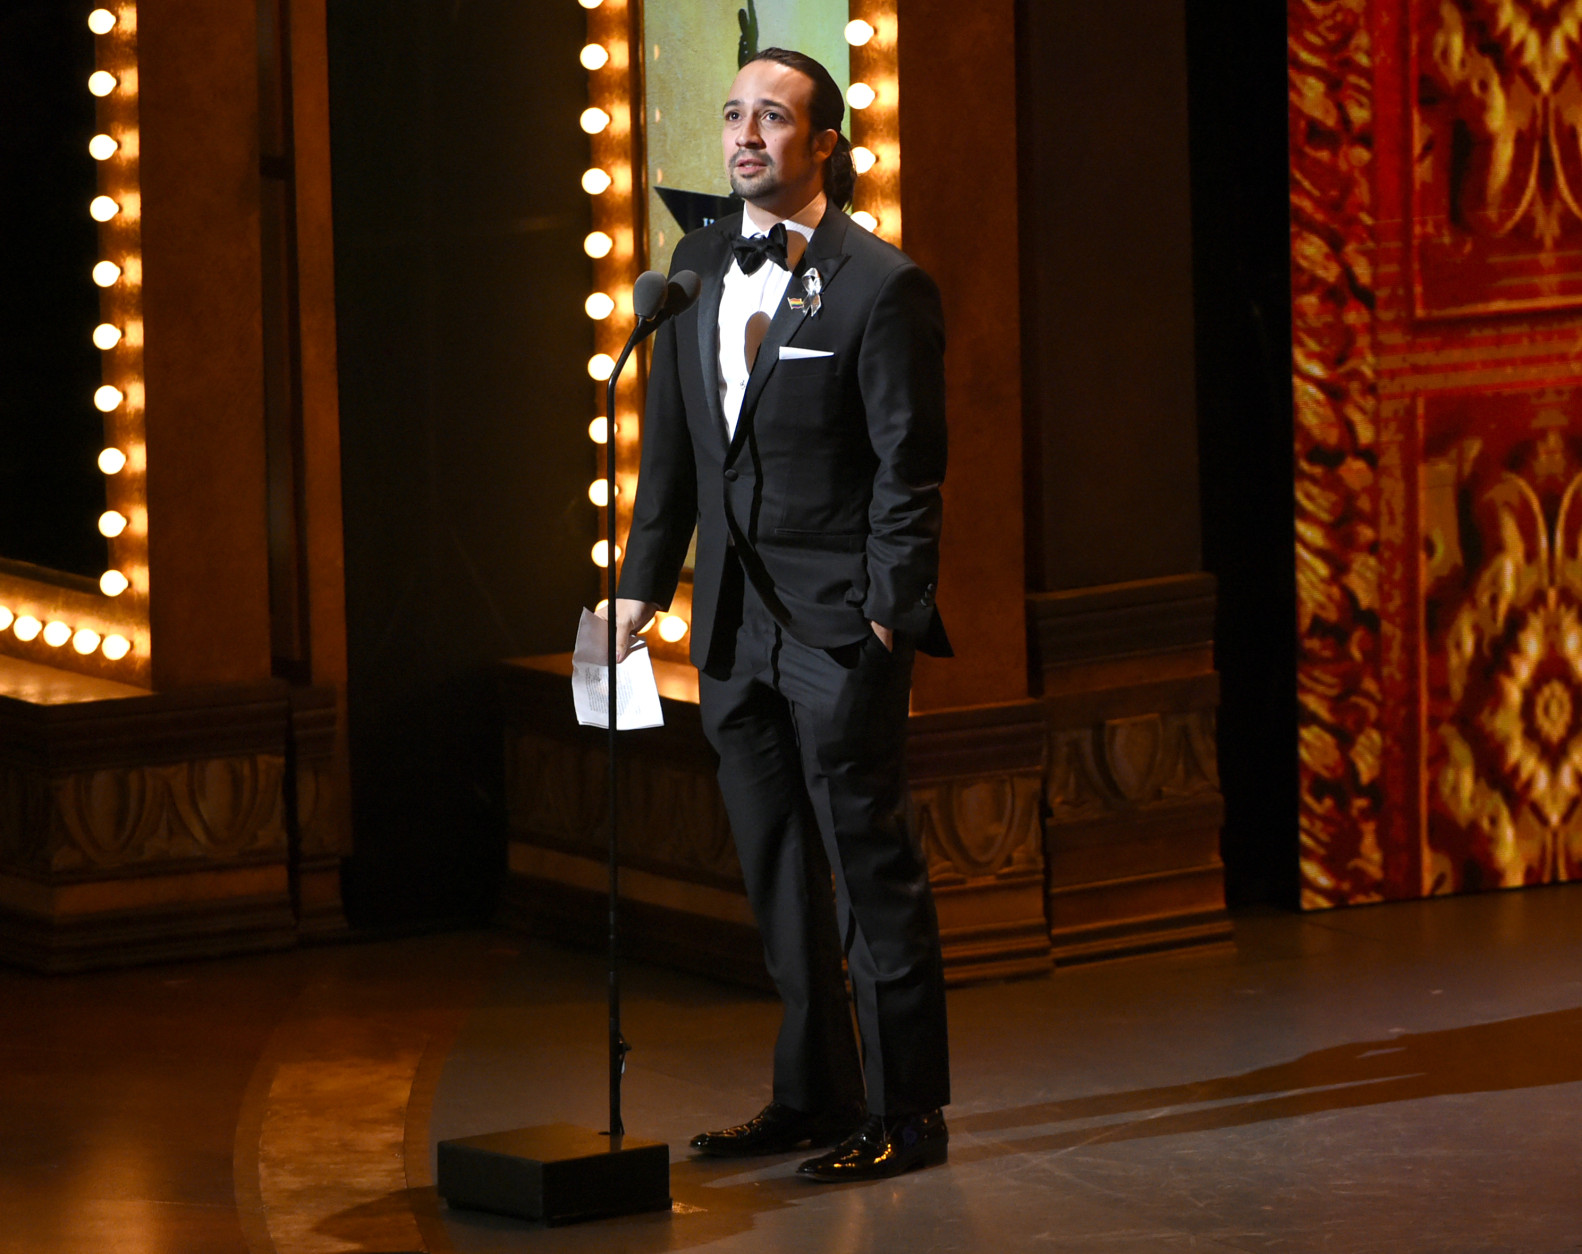 Lin-Manuel Miranda accepts the award for best original  score for  "Hamilton" at the Tony Awards at the Beacon Theatre on Sunday, June 12, 2016, in New York. (Photo by Evan Agostini/Invision/AP)